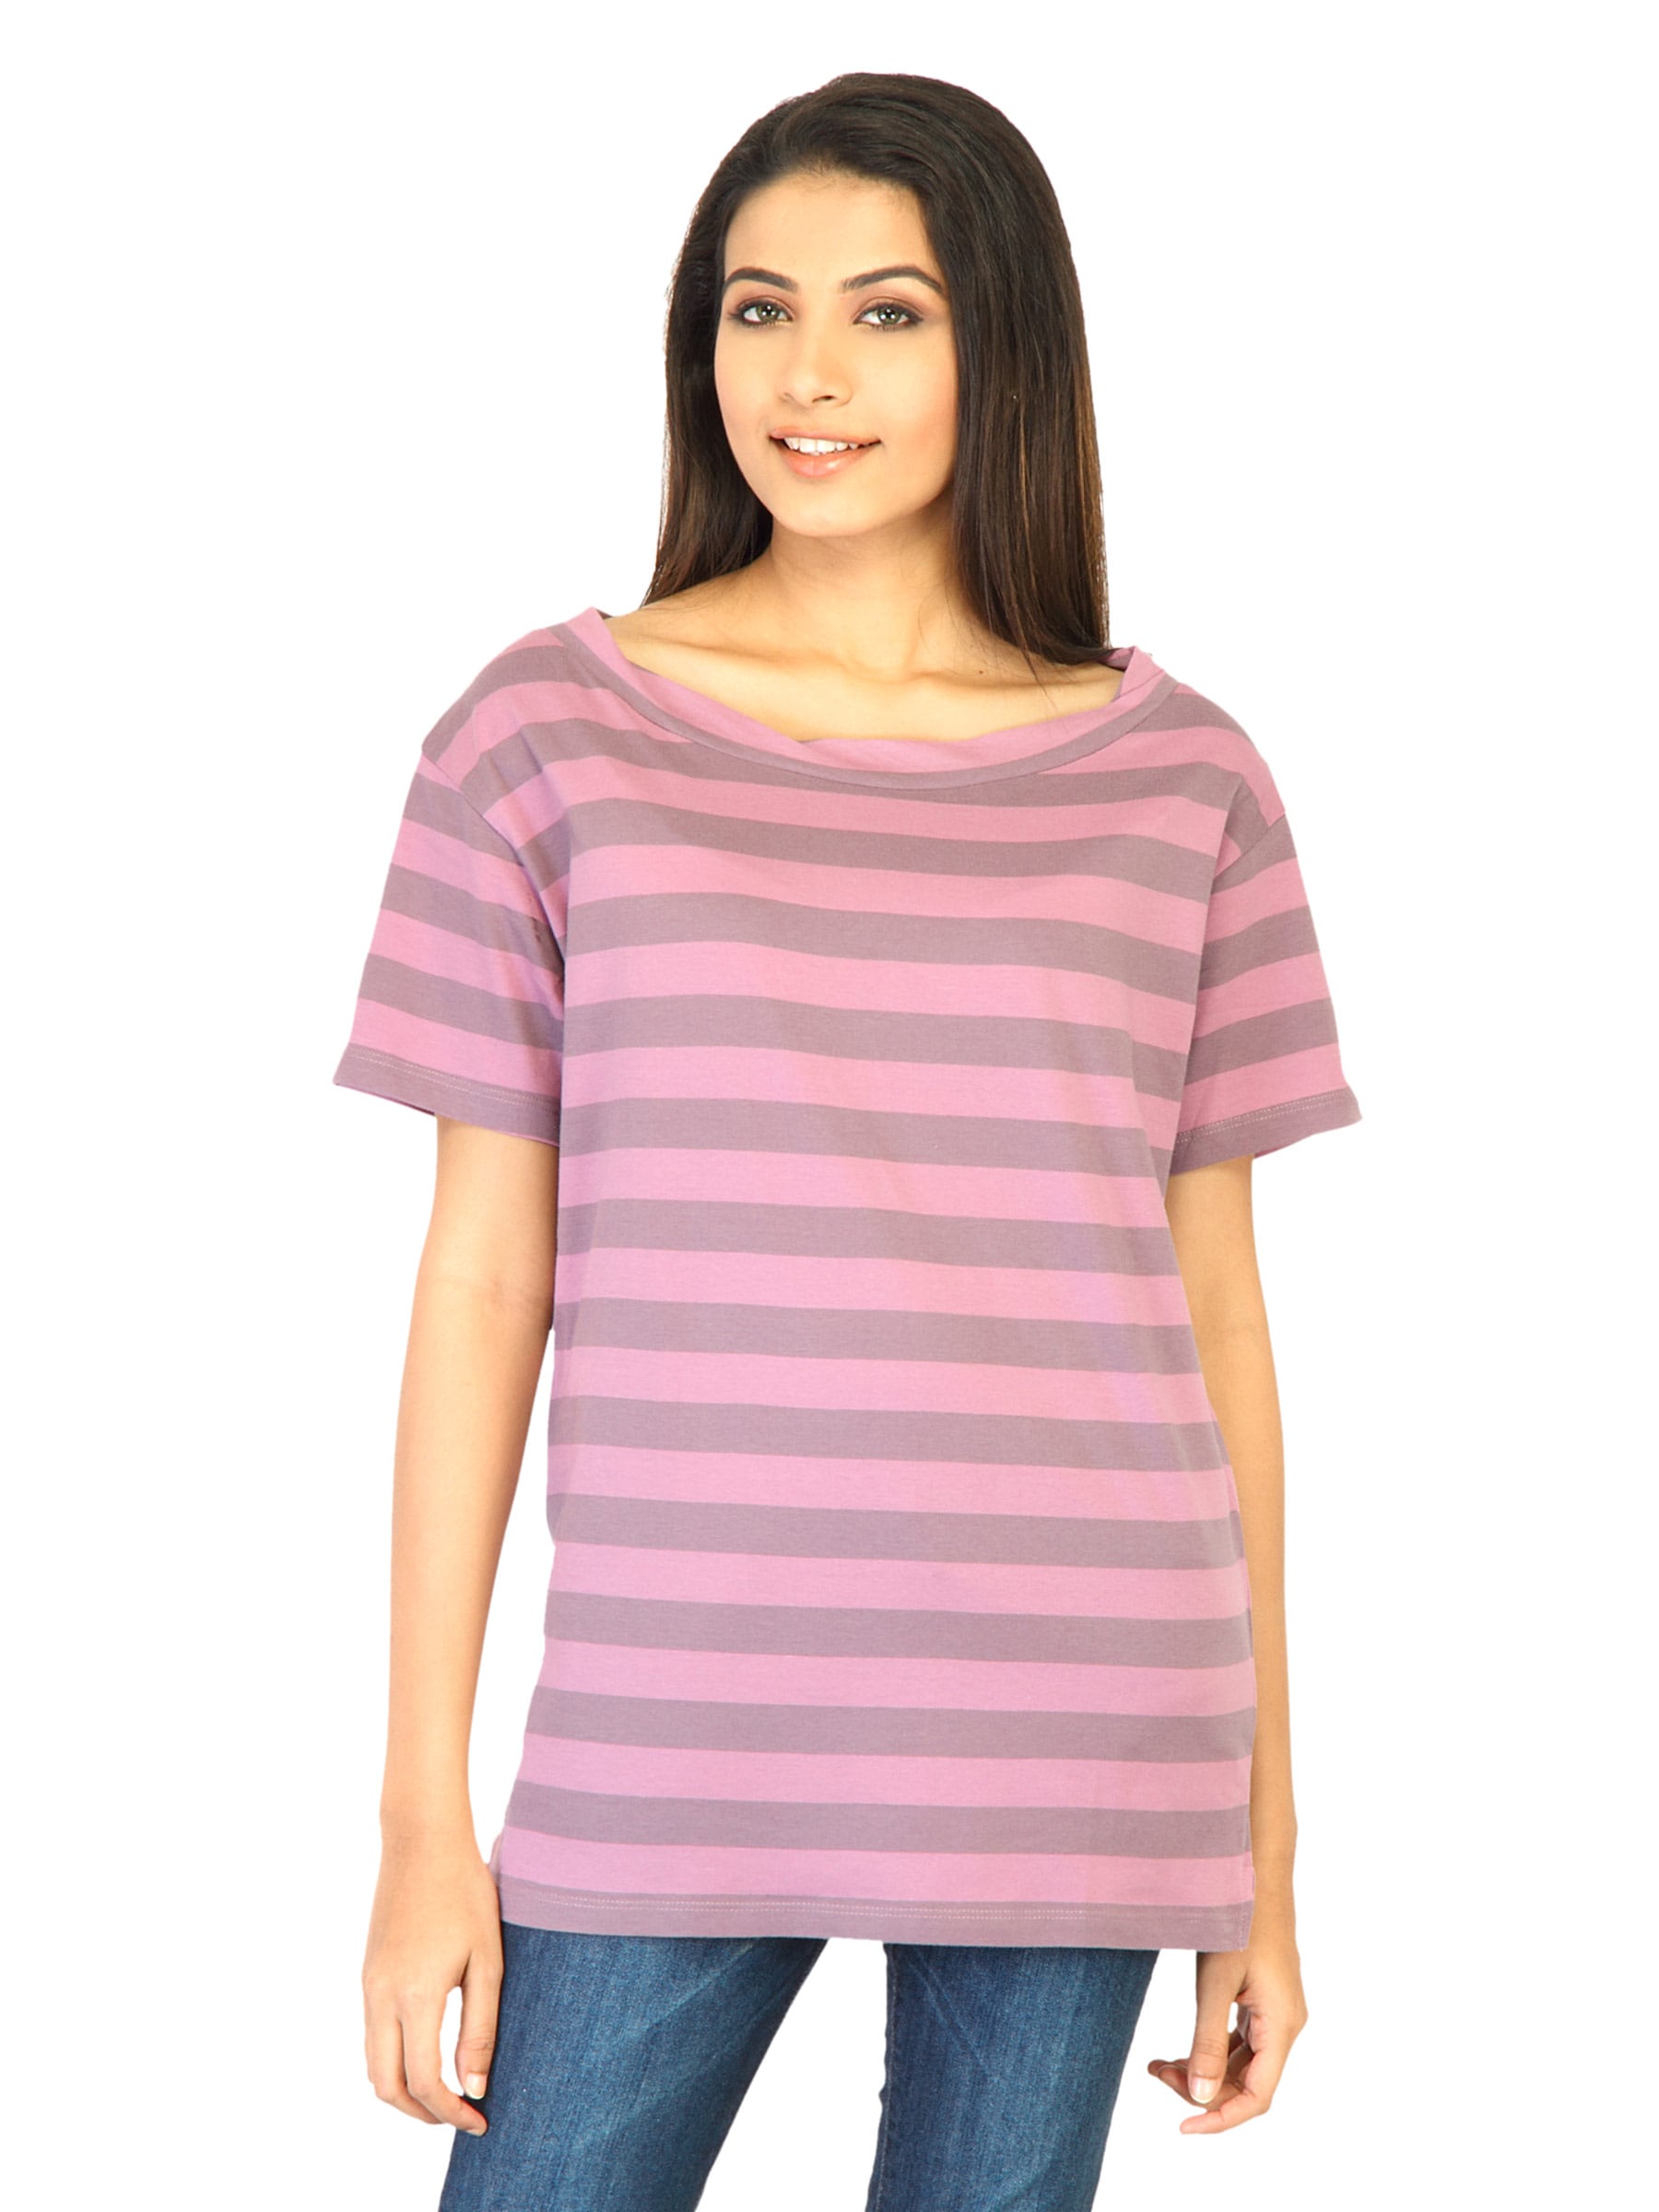 United Colors of Benetton Women Stripes Pink Tops